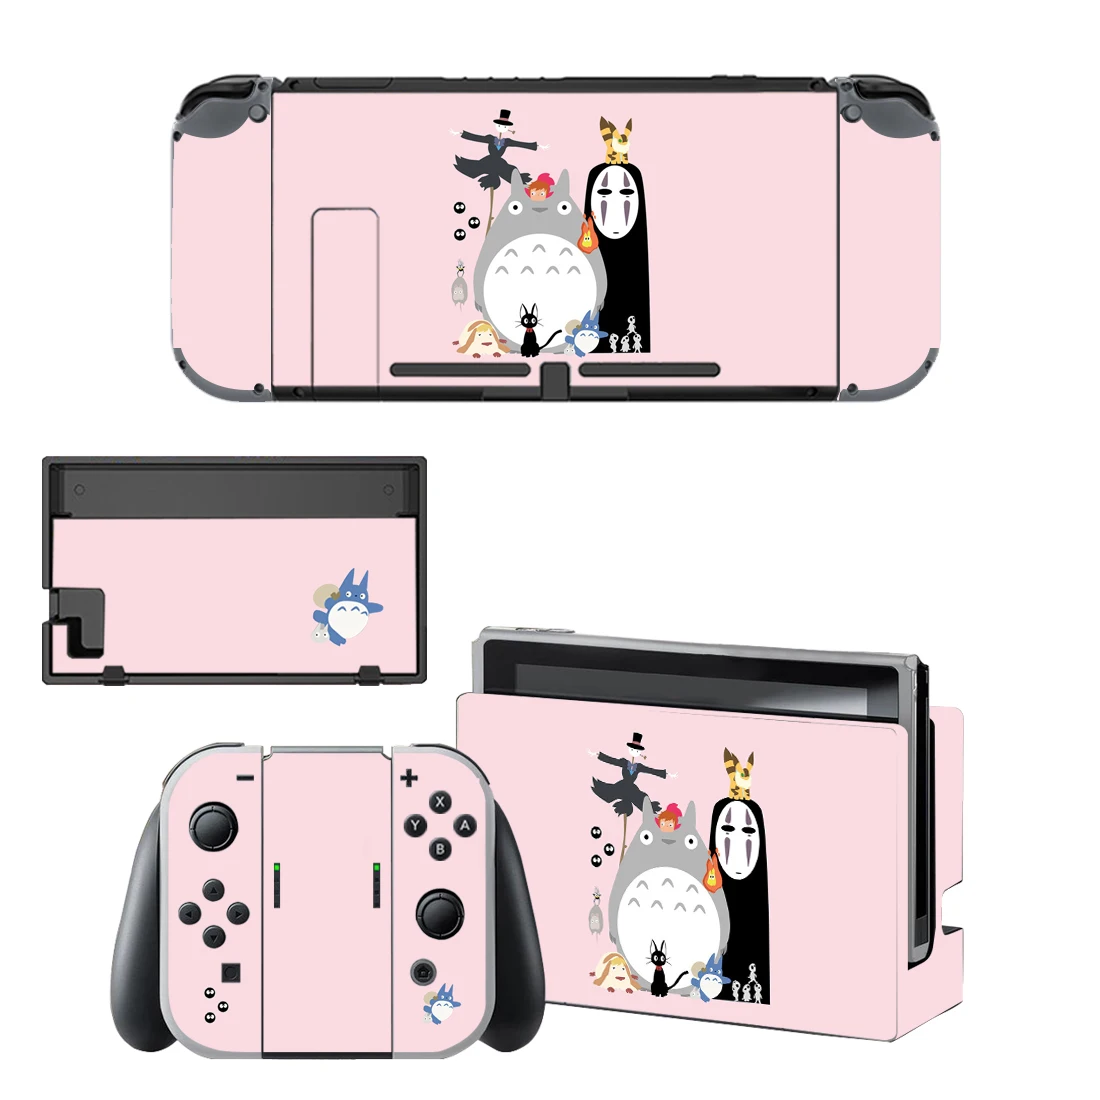 MY NEIGHBOUR TOTORO Nintendo Switch Skin Sticker NintendoSwitch stickers skins for Nintend Switch Console and Joy-Con Controller